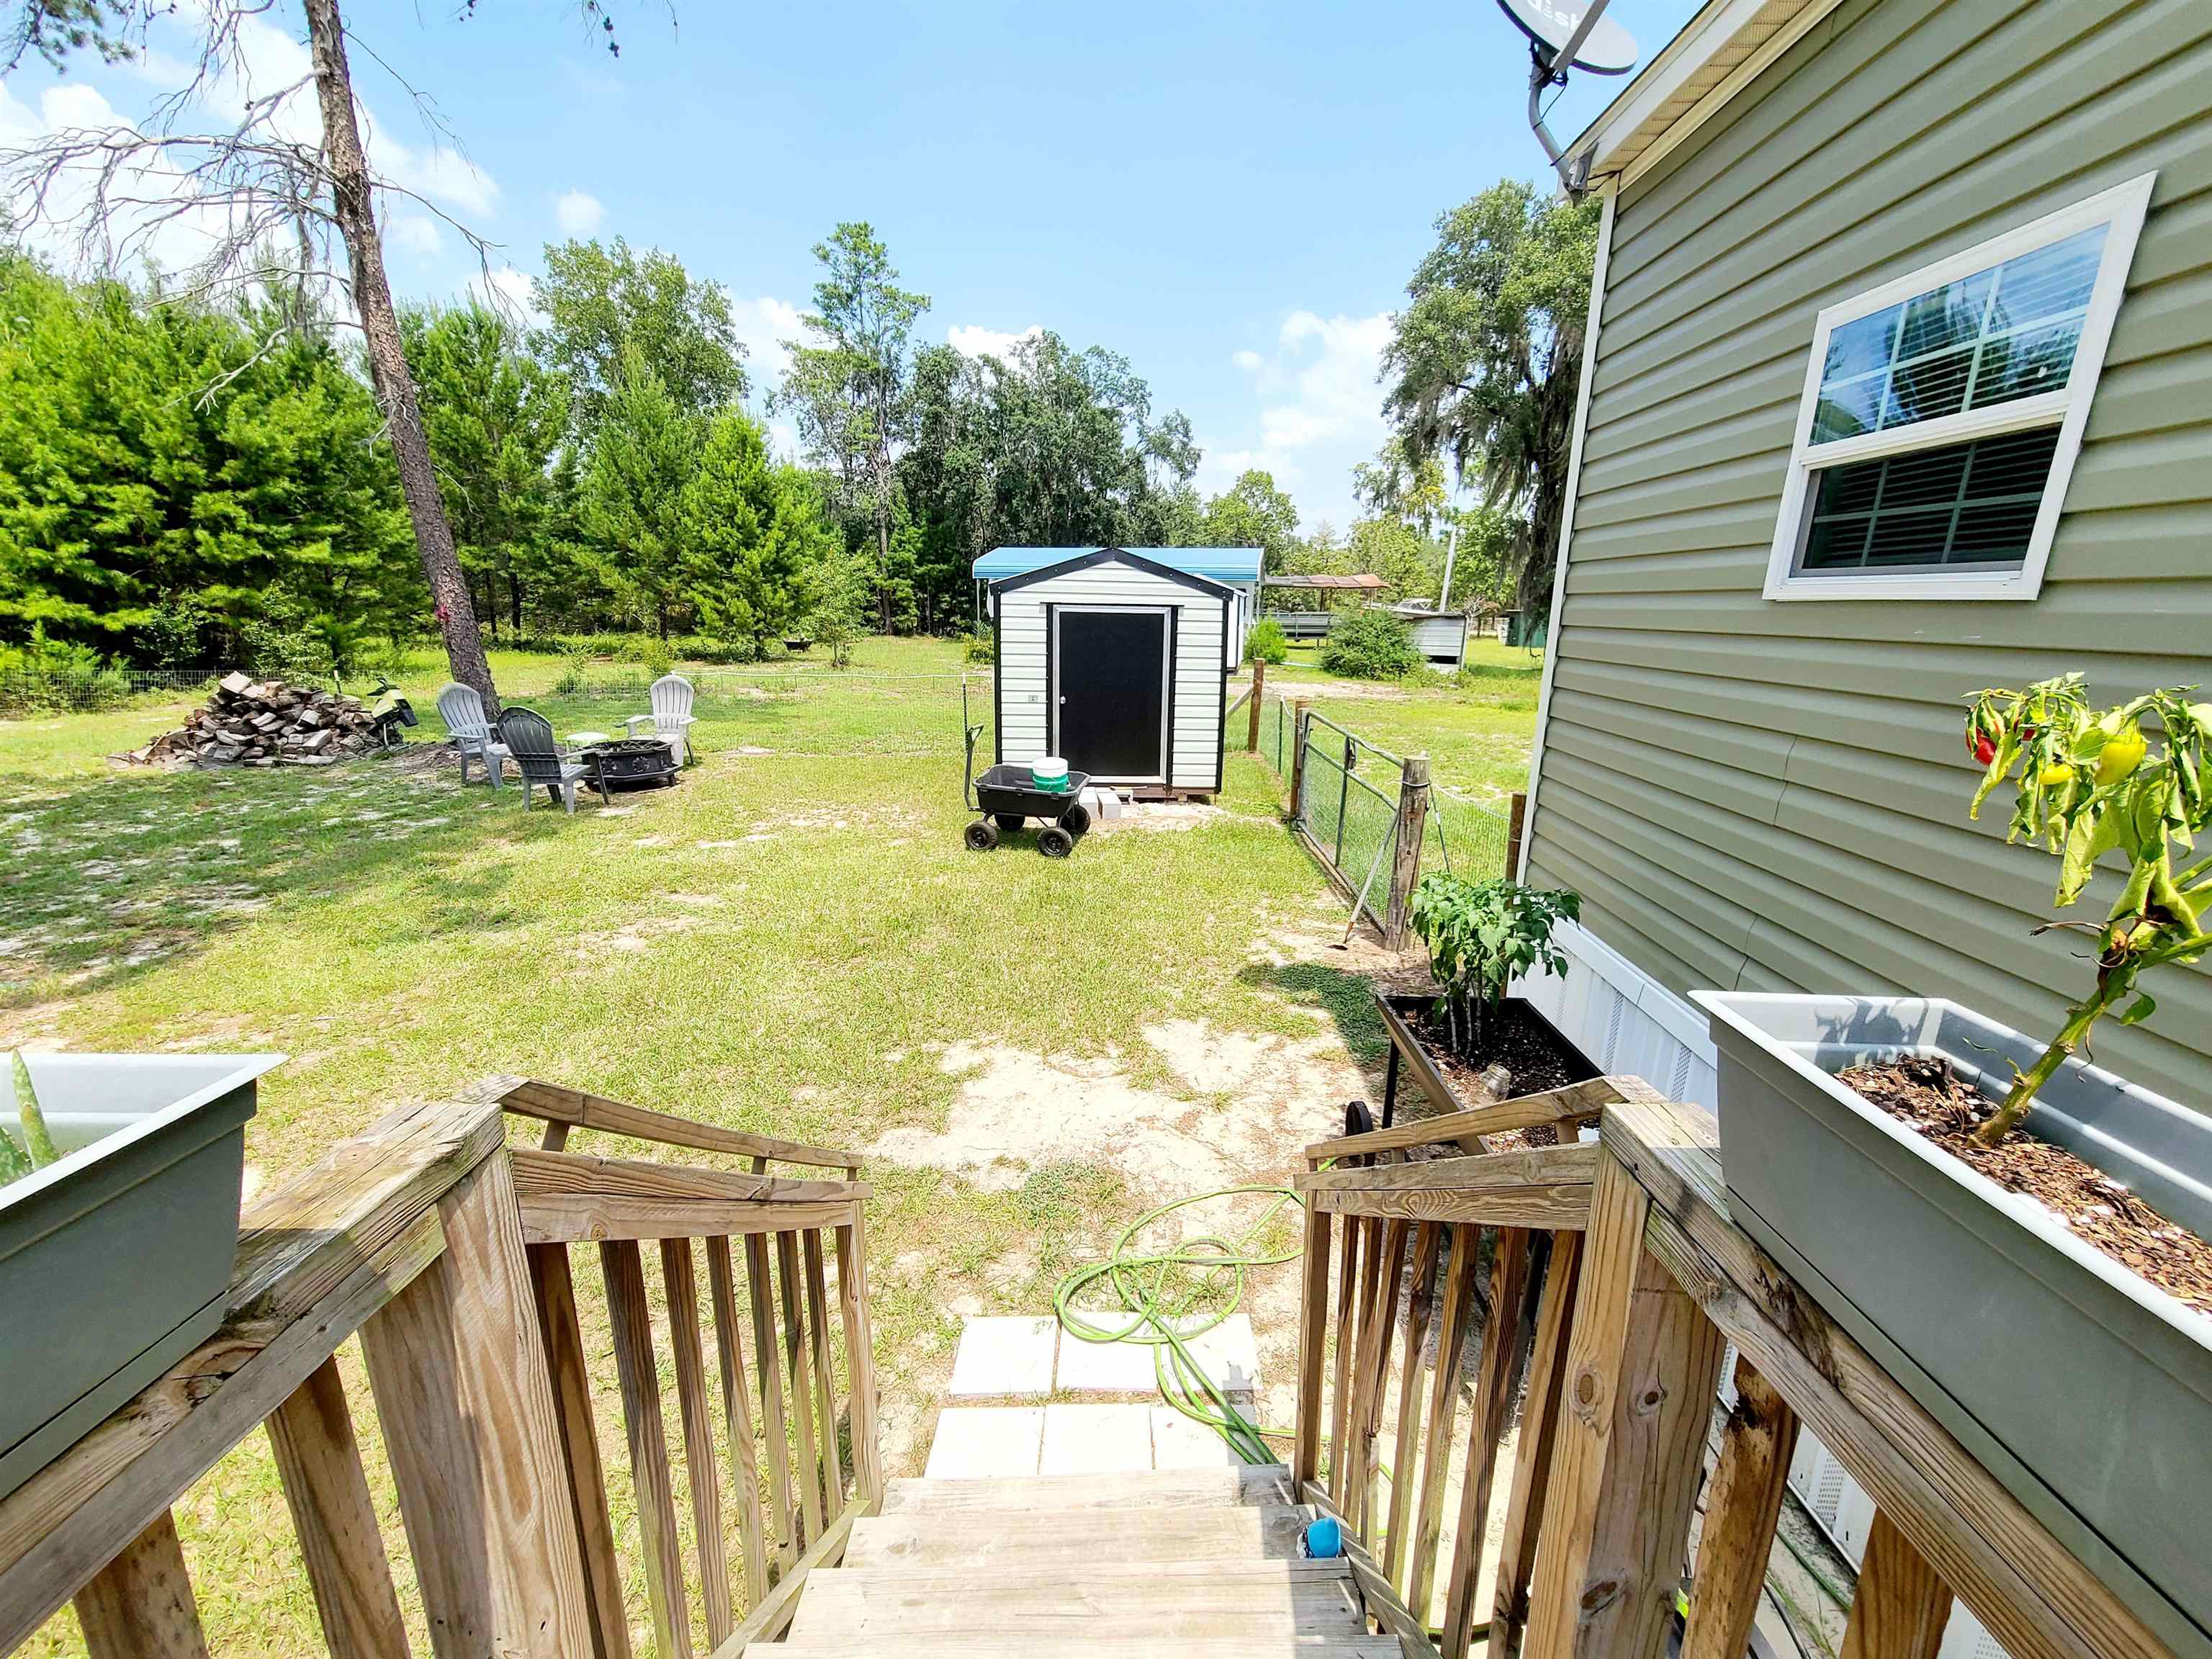 15963 Blue Crab Drive,PERRY,Florida 32348,3 Bedrooms Bedrooms,2 BathroomsBathrooms,Manuf/mobile home,15963 Blue Crab Drive,362801